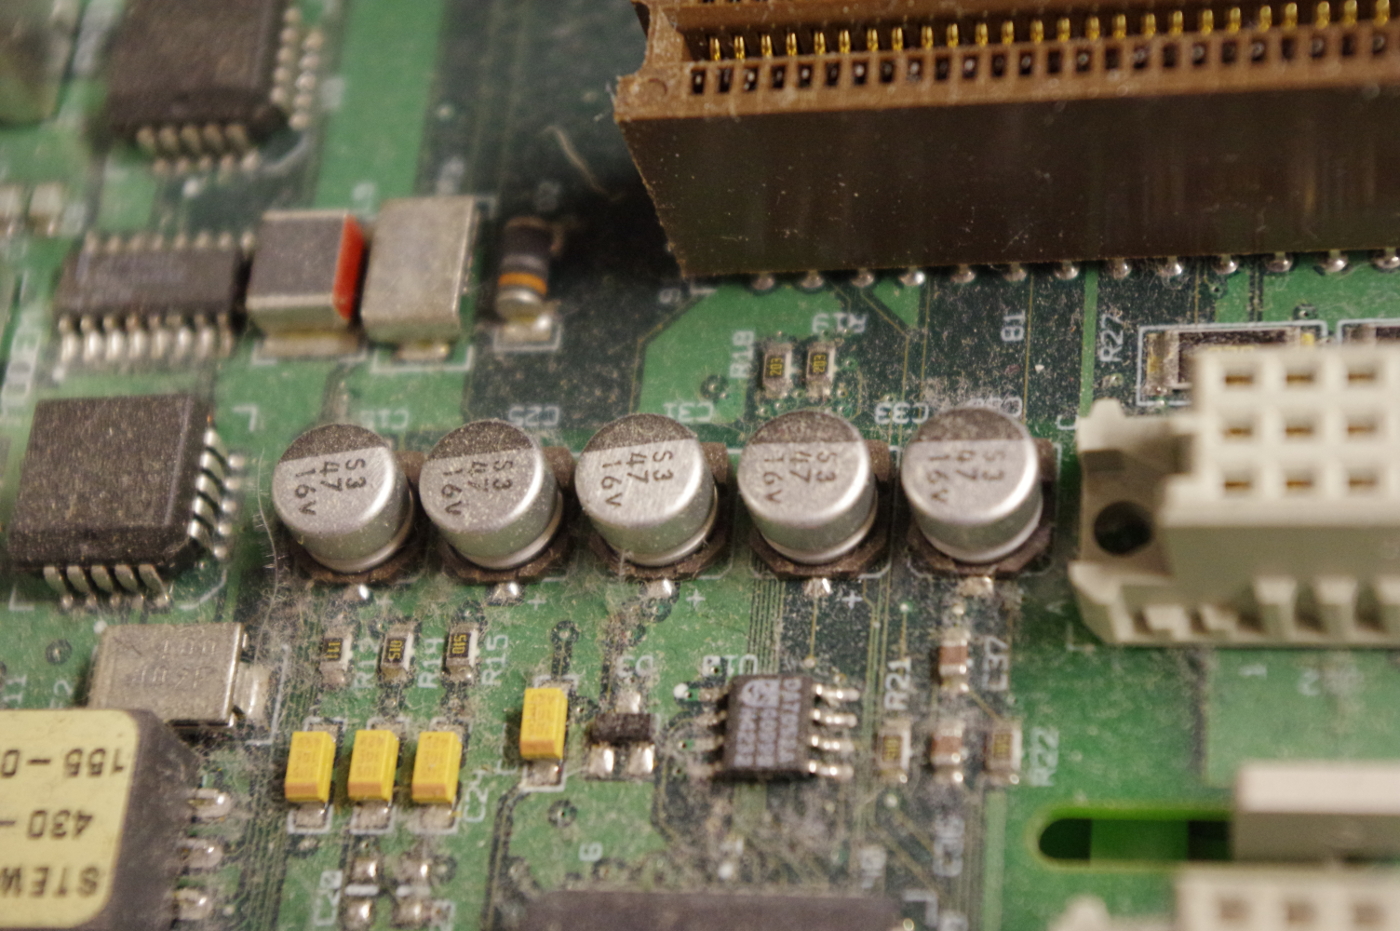 "After pulling everything out and inspecting the motherboard, caps appear to be in good condition (or, at least, haven't started leaking yet).  Still considering whether a preemptive re-cap is appropriate."